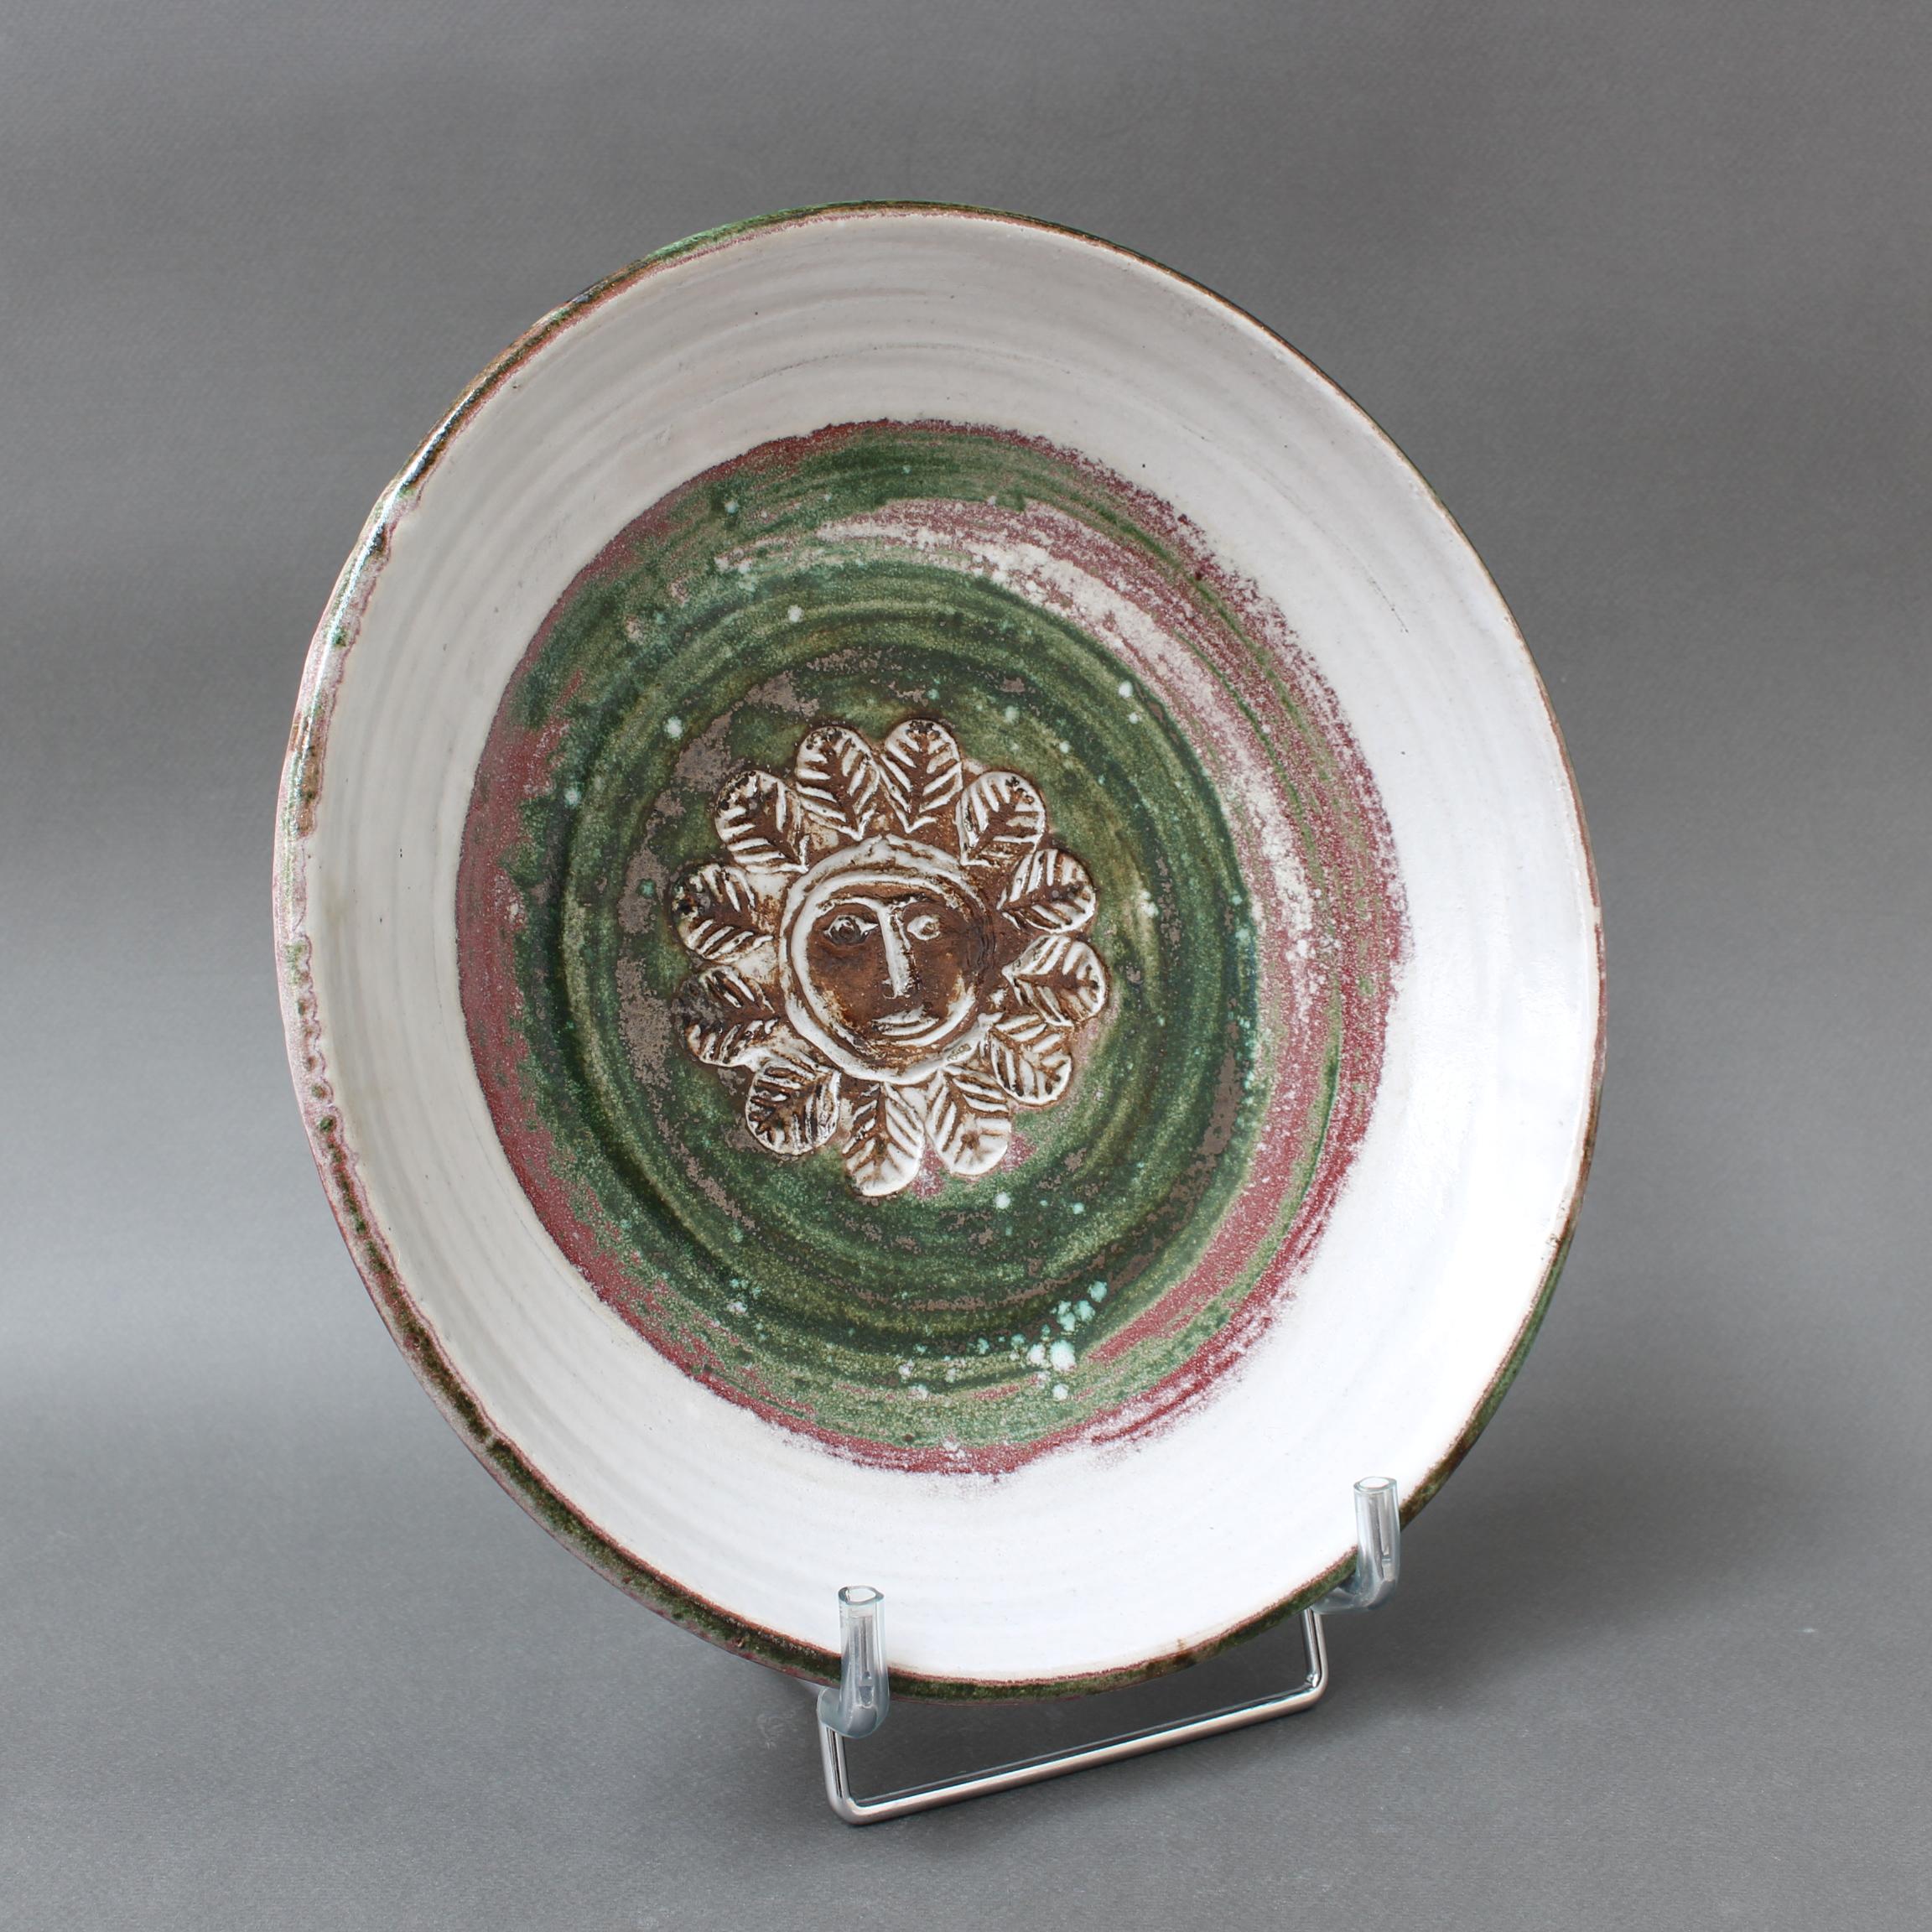 Mid-century decorative platter (circa 1960s) by Albert Thiry (1932-2009). A whitened glaze encircles a deeply engraved sunflower motif (with face) in brown and highlighted by forest green and mulberry coloured concentric circles. Rustic yet